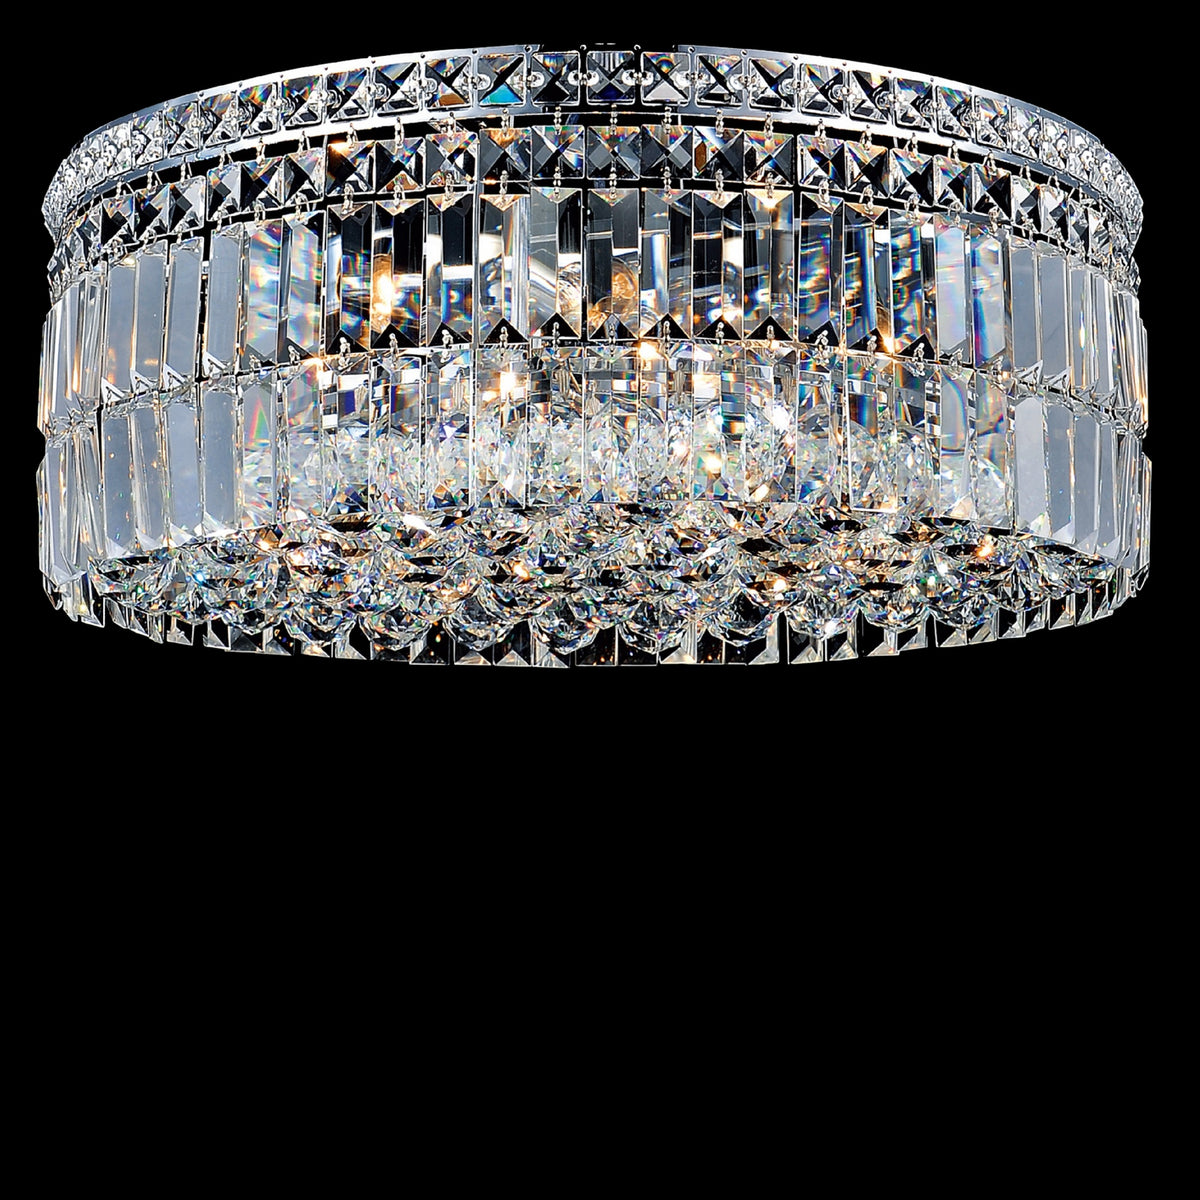 CWI Lighting Ten Light Flush Mount from the Colosseum collection in Chrome finish